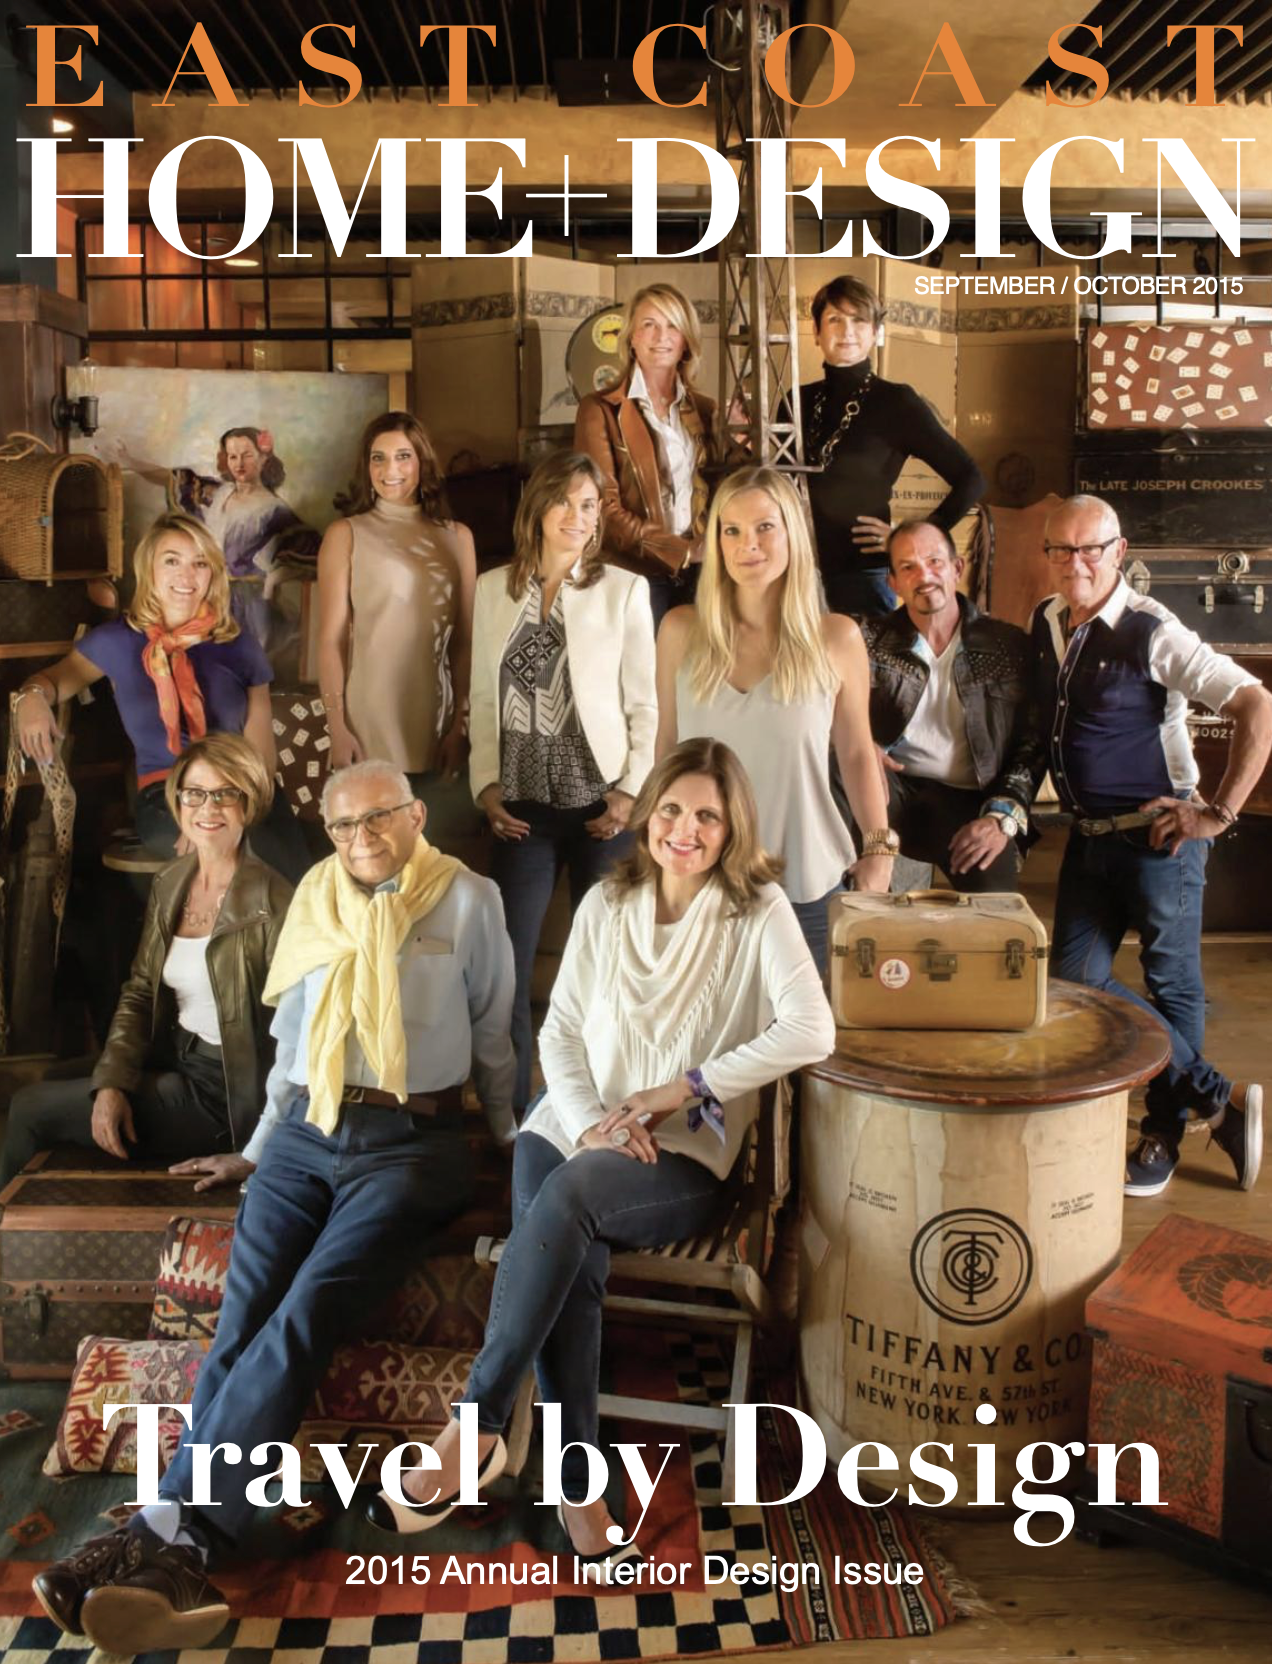 East Coat Home+Design 2015 Annual Interior Design Issue Featuring Lara Michelle Interiors Inc. Westchester NY and Greenwich CT